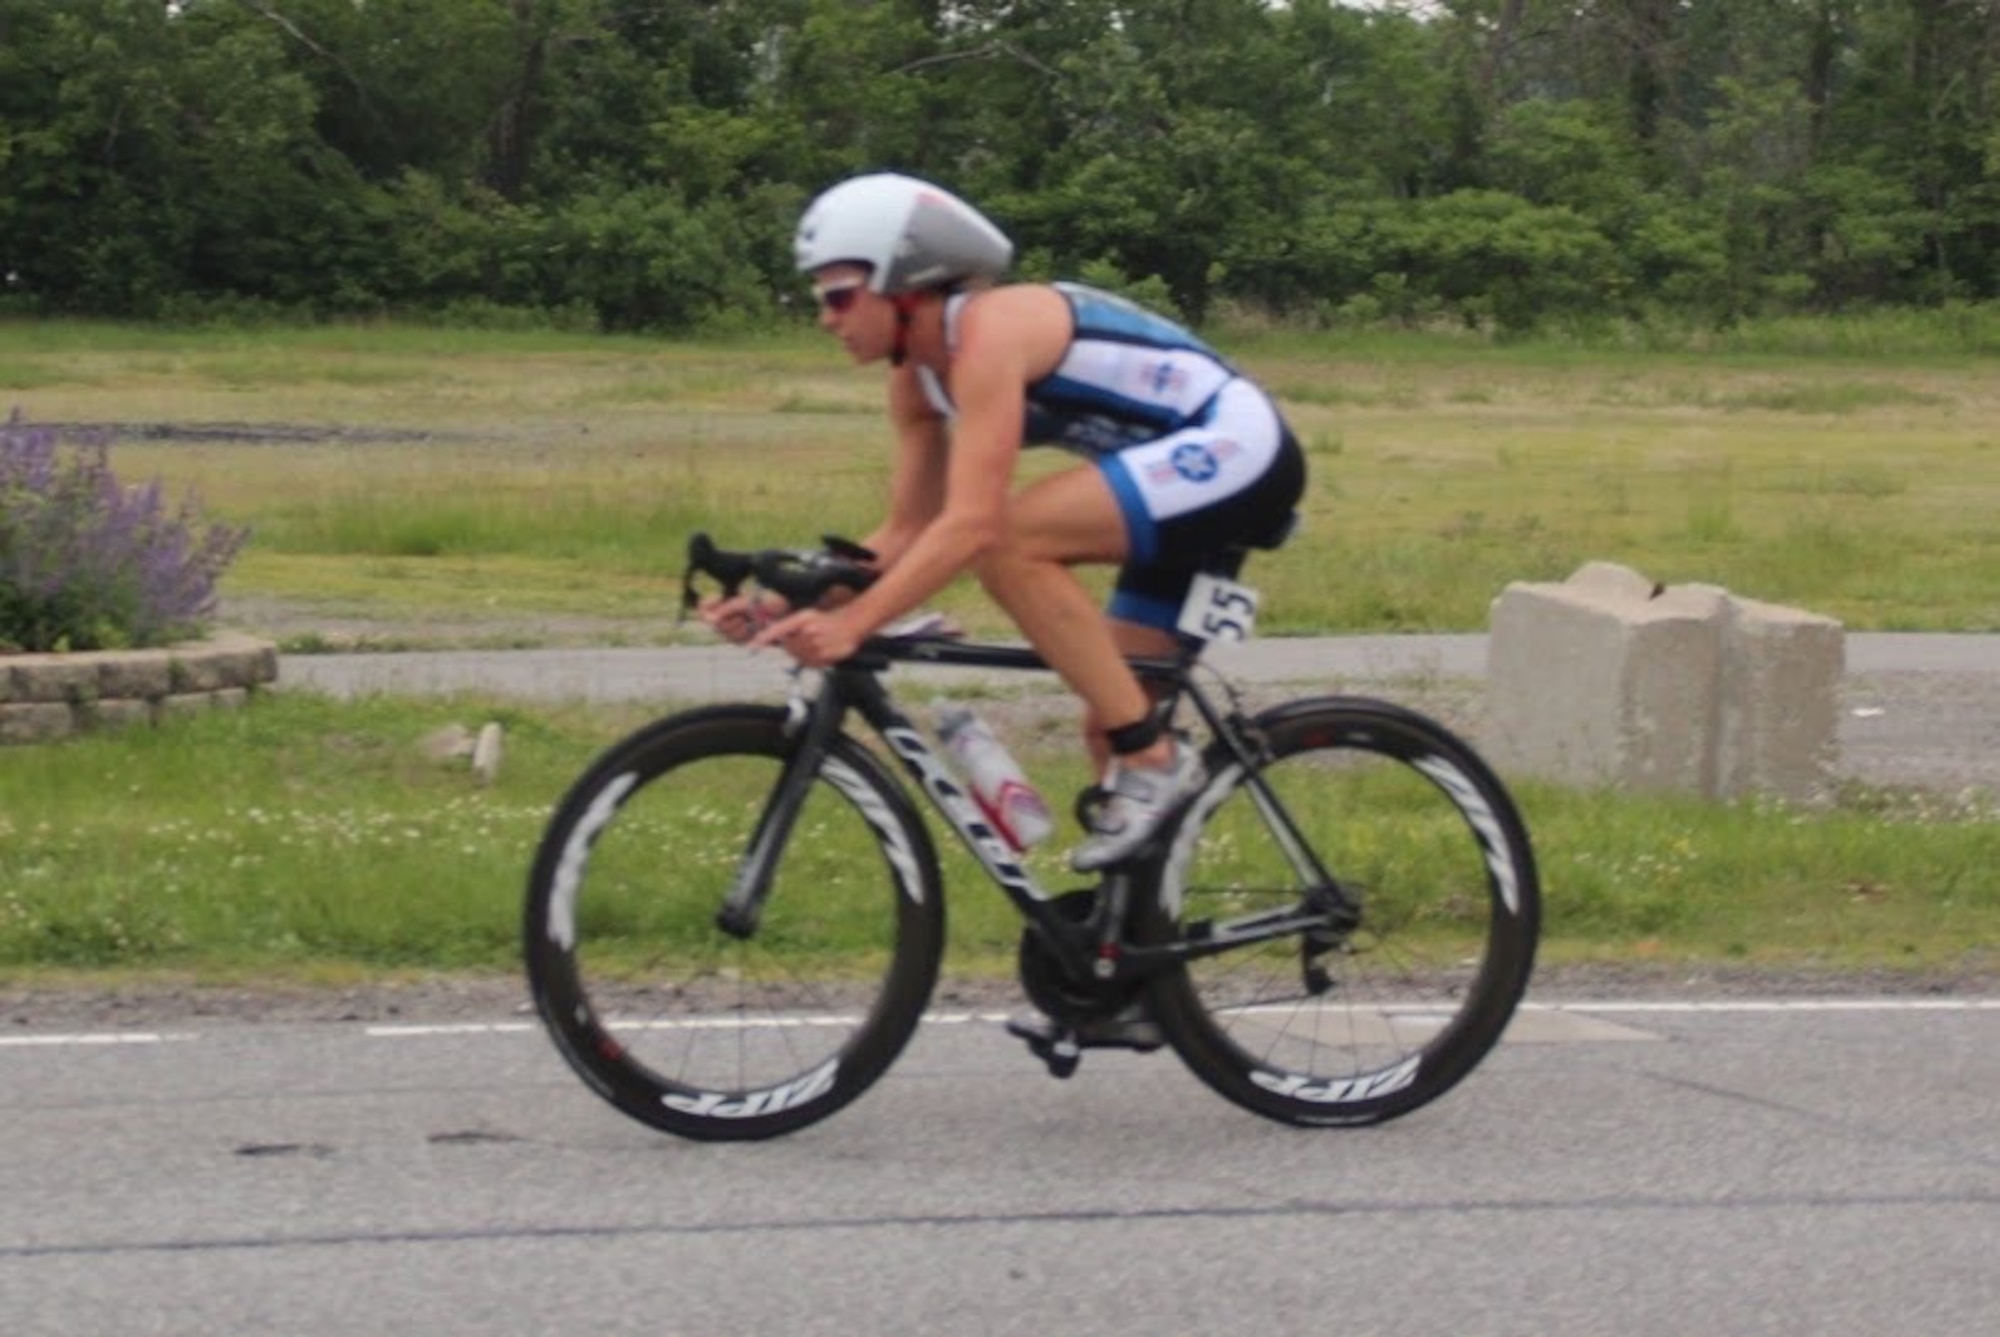 Maj. Jamie Turner bikes during the Armed Forces Triathlon Championship race in Hammond, Indiana, June 7, 2015. Turner continued her world-class triathlete success as the second female to cross the finish line and automatically qualified as one of six athletes to compete on the women’s team at the Military World Games in Mungyeong, South Korea, Oct. 2-11, 2015. Turner is a C-17 pilot with the 317th Airlift Squadron. (Courtesy photo)